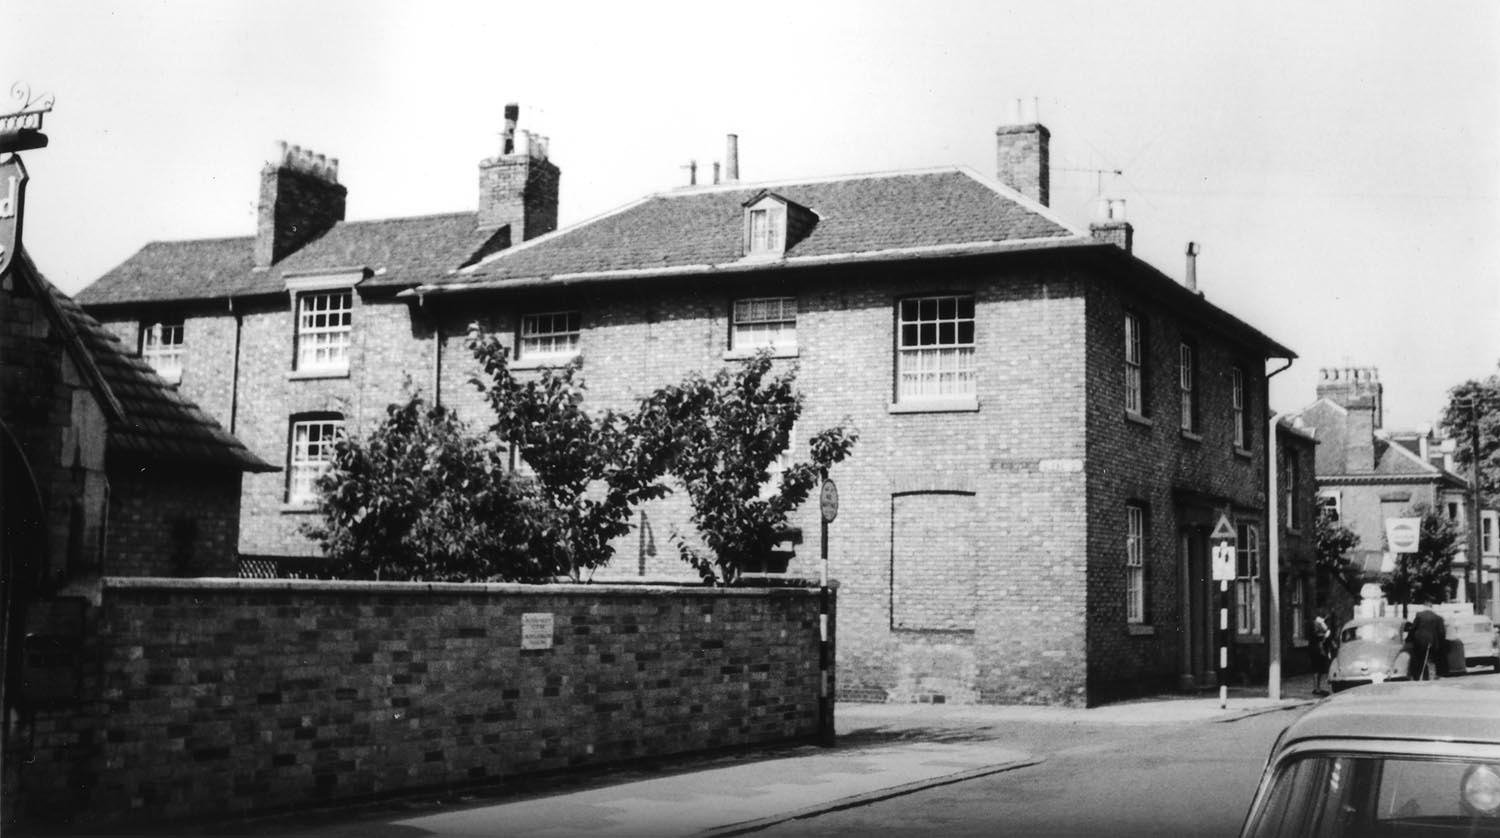 20 Glebe Street in 1965 - Dennis Calow / University of Leicester Special Collections